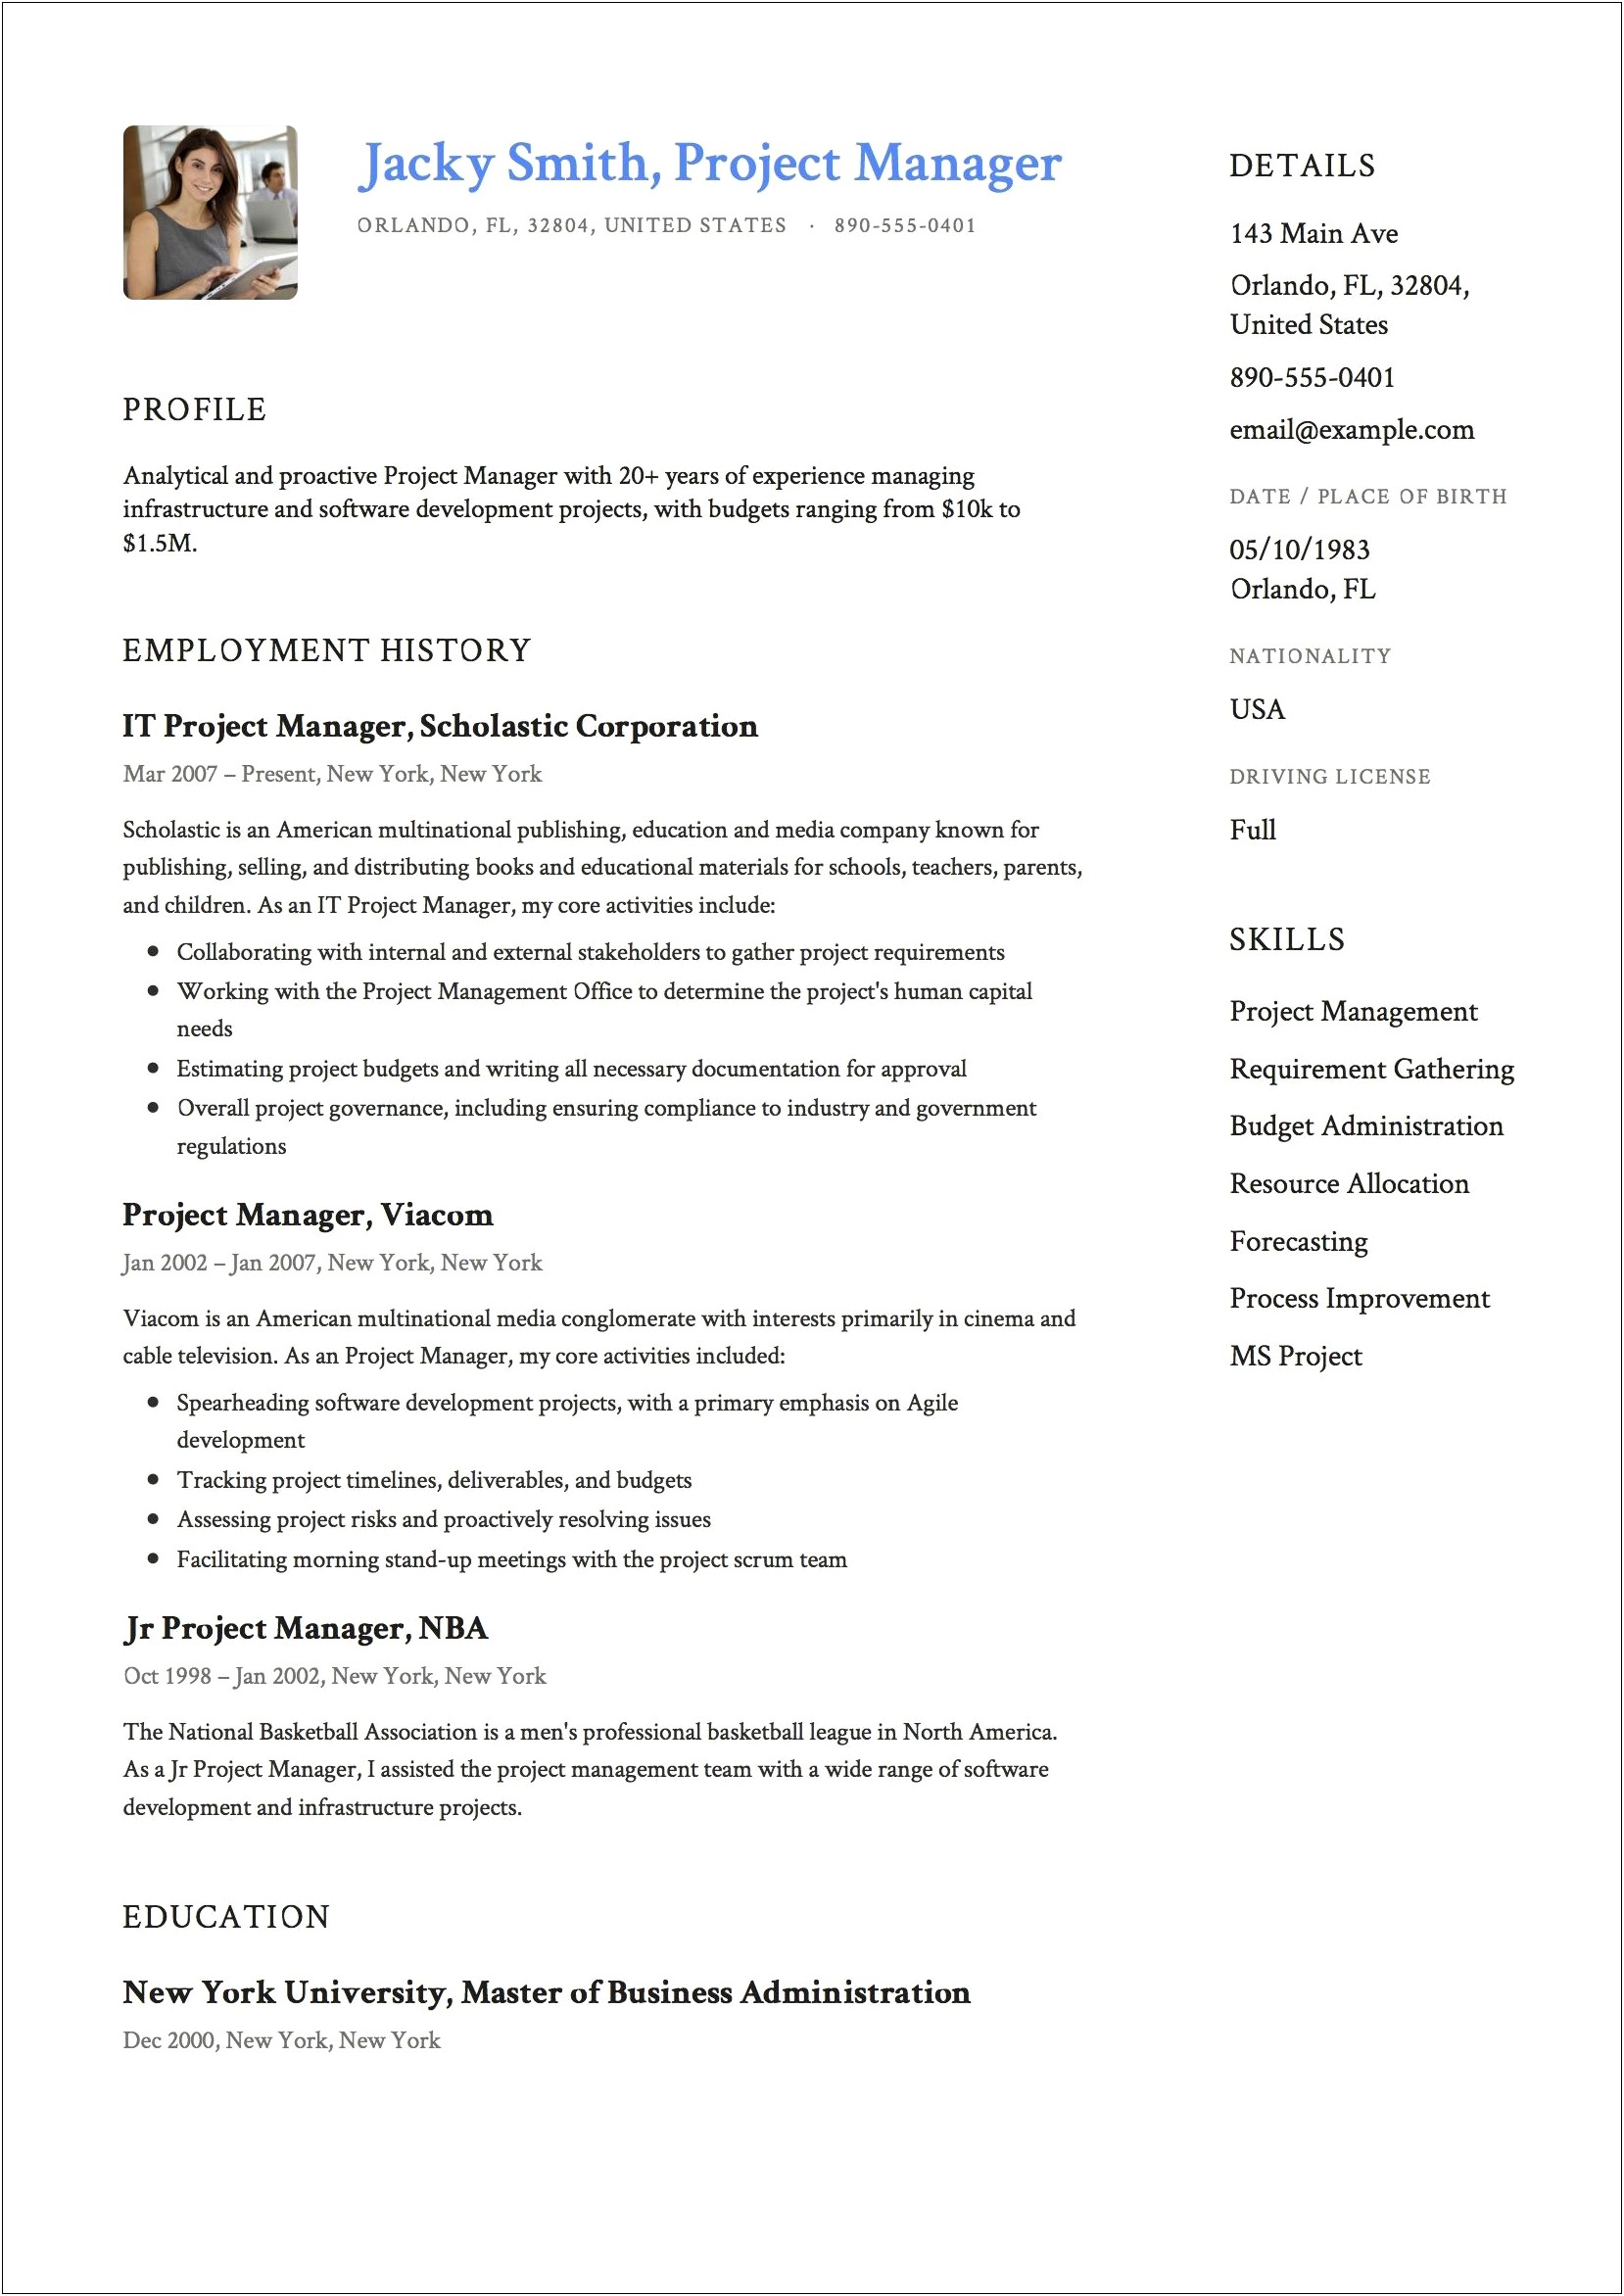 Software Project Lead Resume Sample